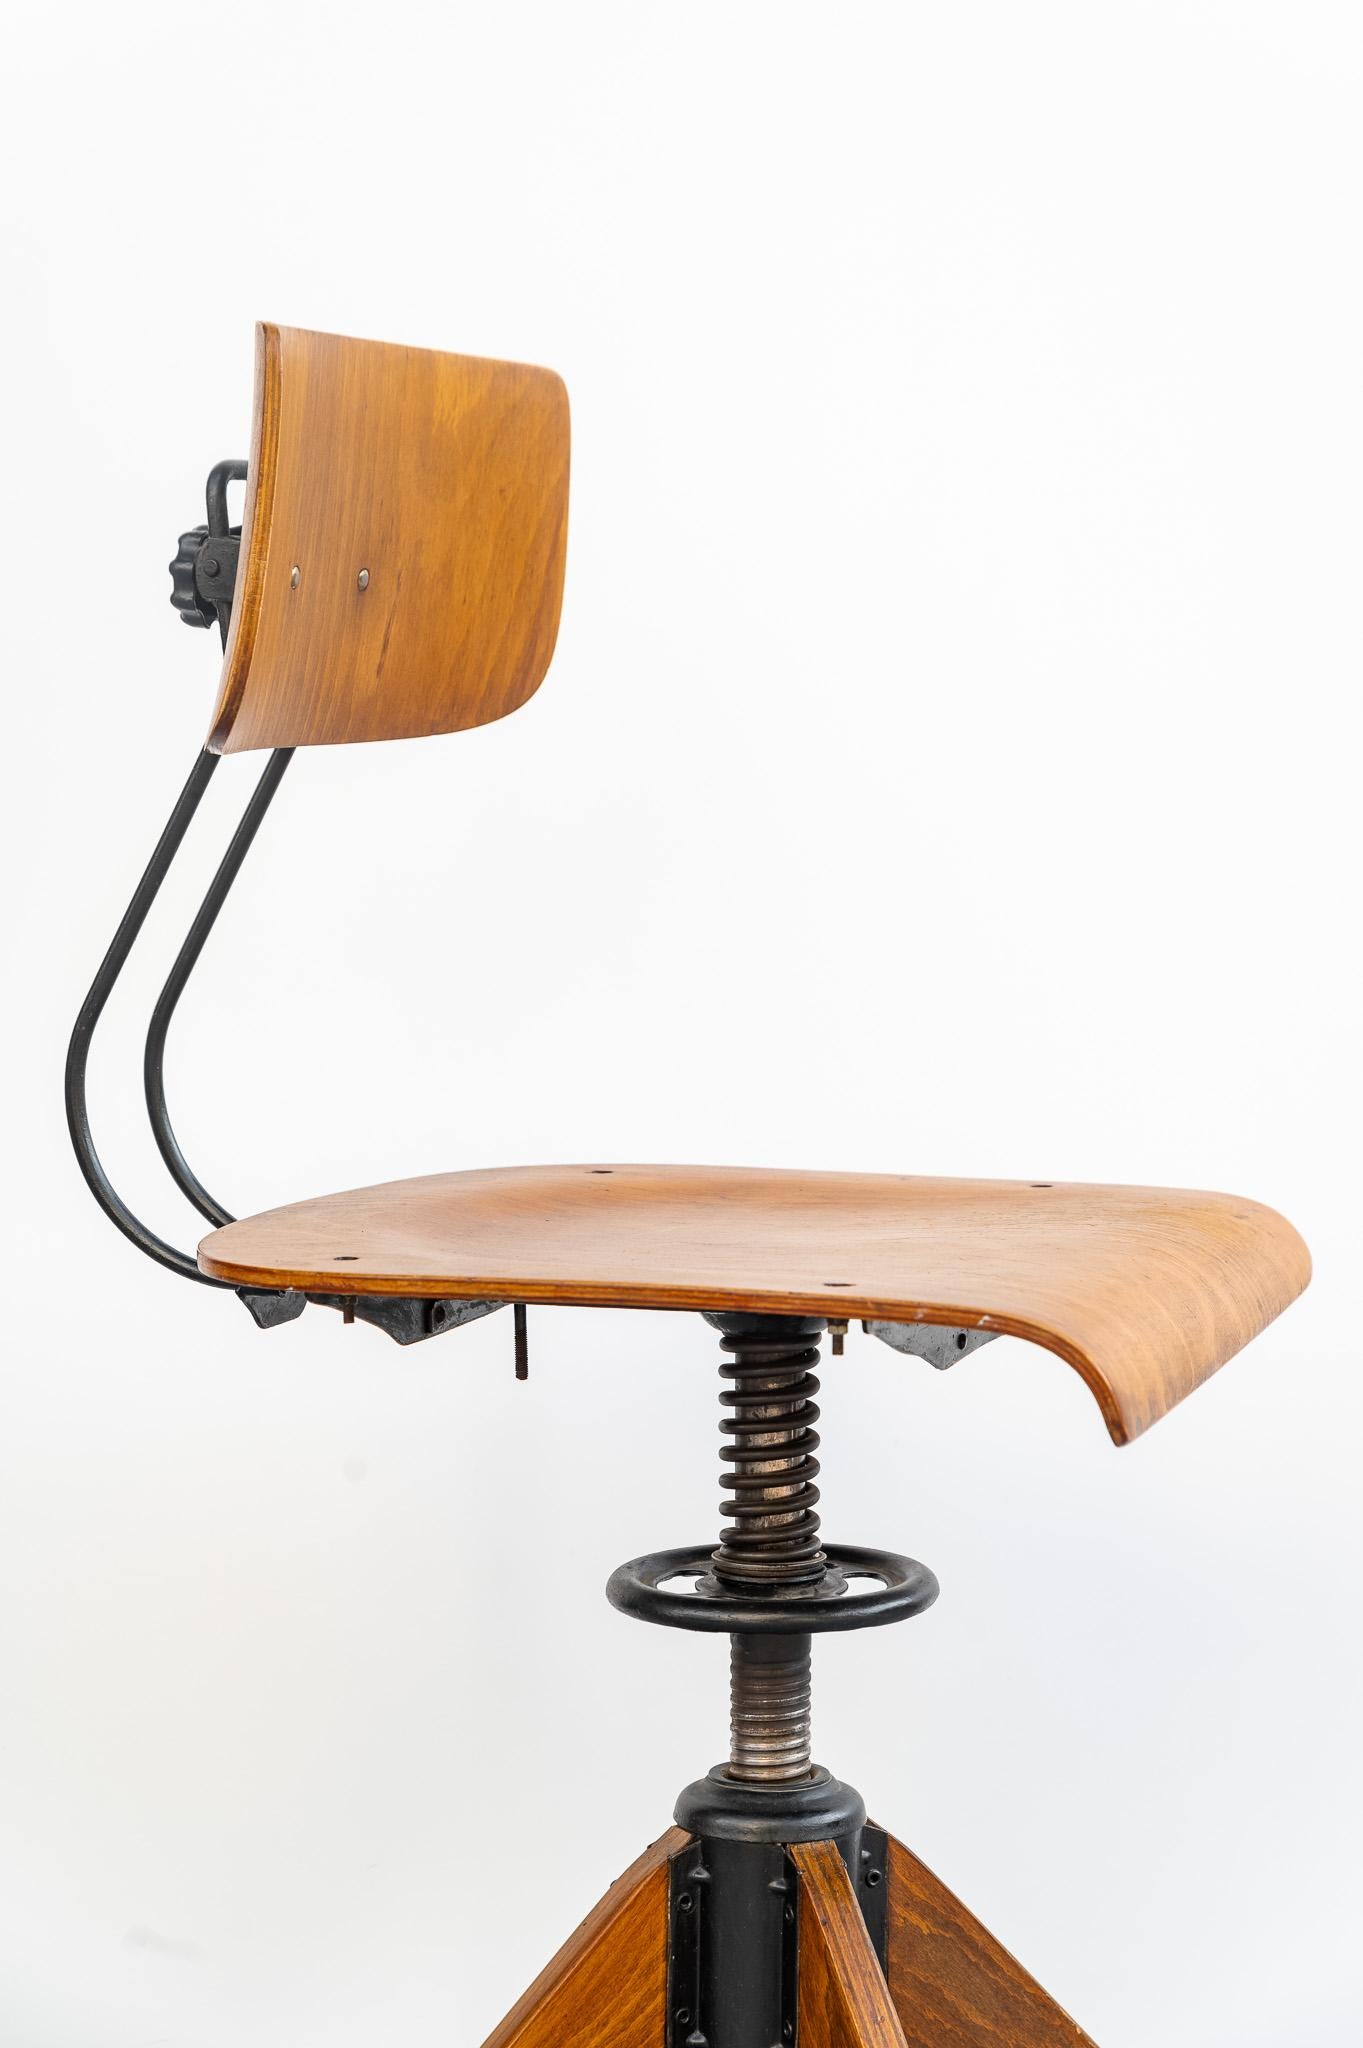 Rowac swivel desk chair by Robert Wagner, 1920s. 
Rare industrial chair with industral patina. It was made in Germany in the 1920s and designed by Robert Wagner, Rowac. The chair is very comfortable, thanks to the position of the seat and the sprung